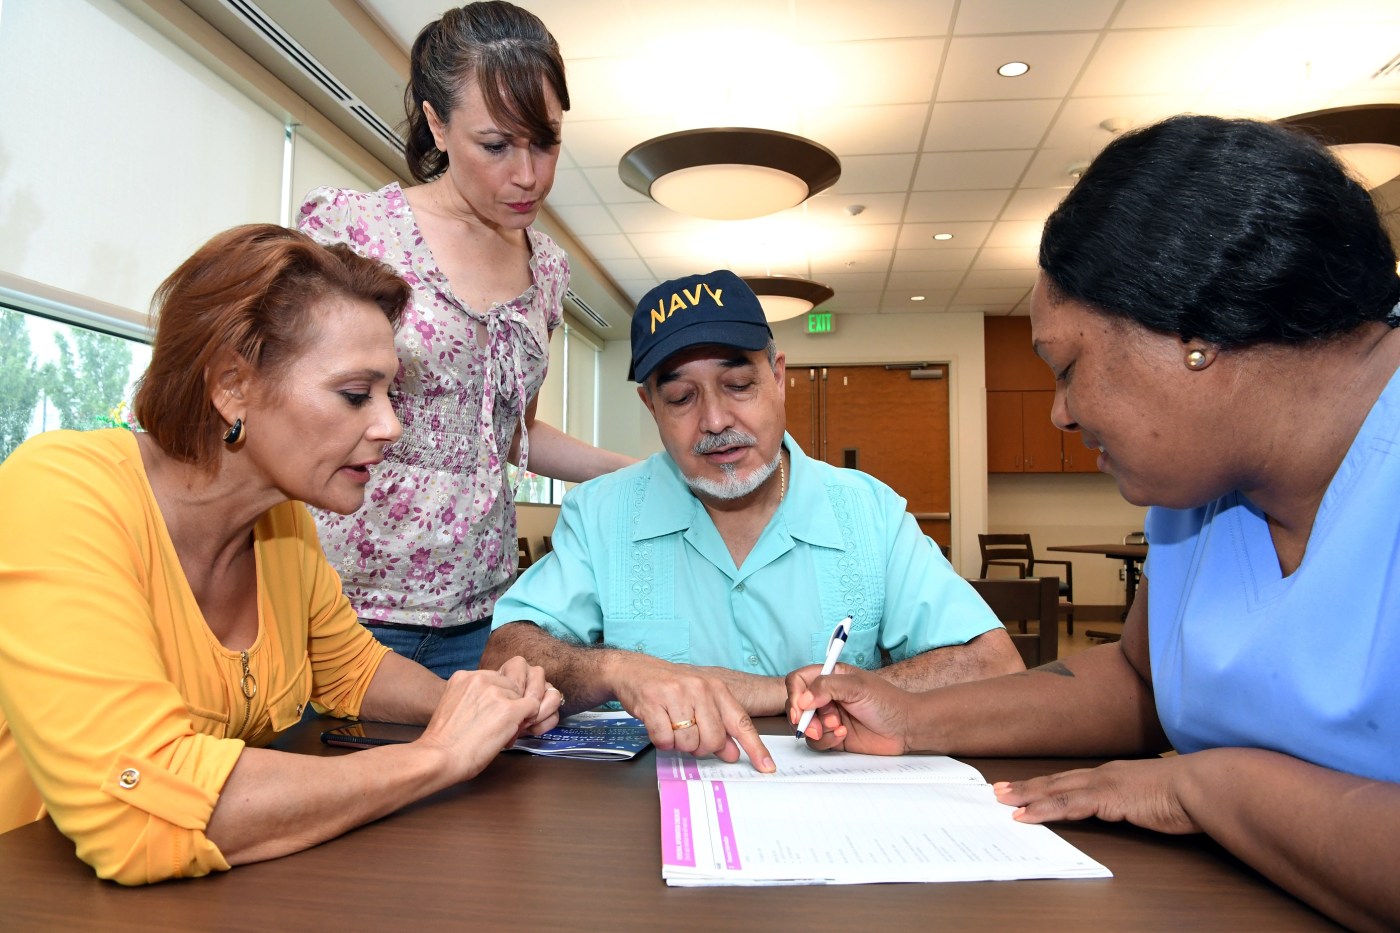 AARP’s free financial workbook helps Veterans and military caregivers plan future